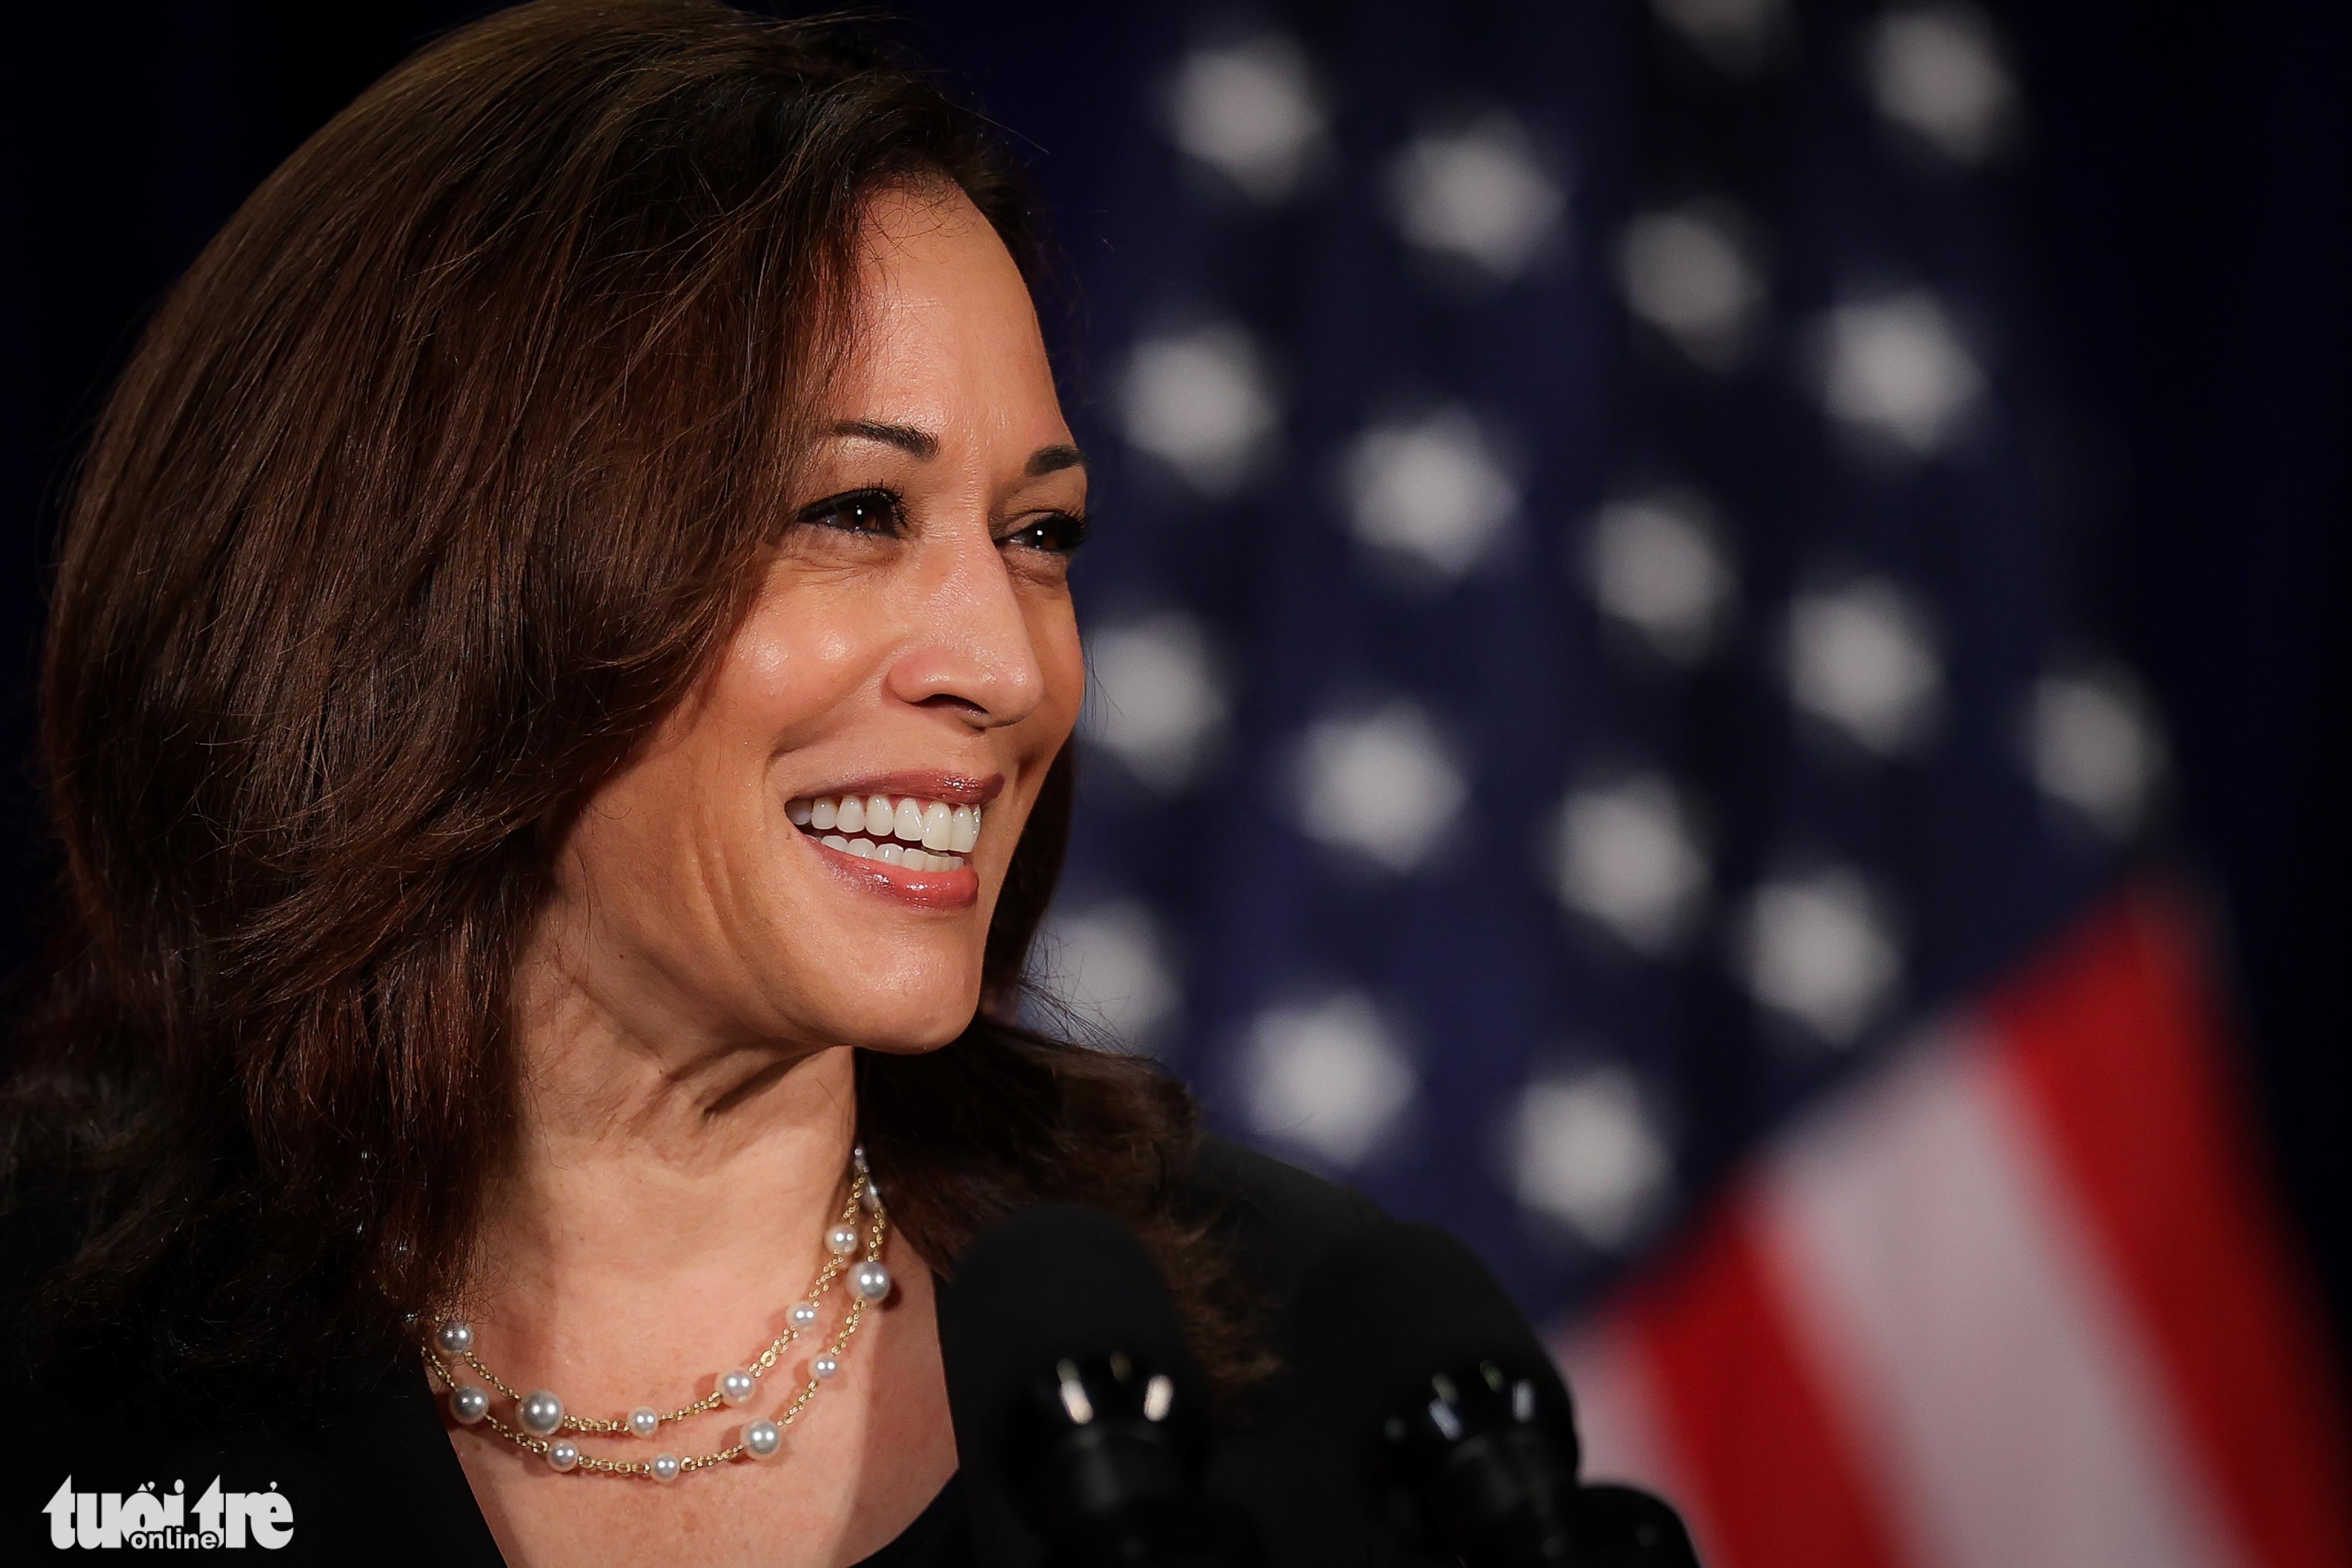 U.S. Vice President Kamala Harris at a press conference at the end of her business trip to Vietnam from August 24 to 26. Photo: Nguyen Khanh / Tuoi Tre